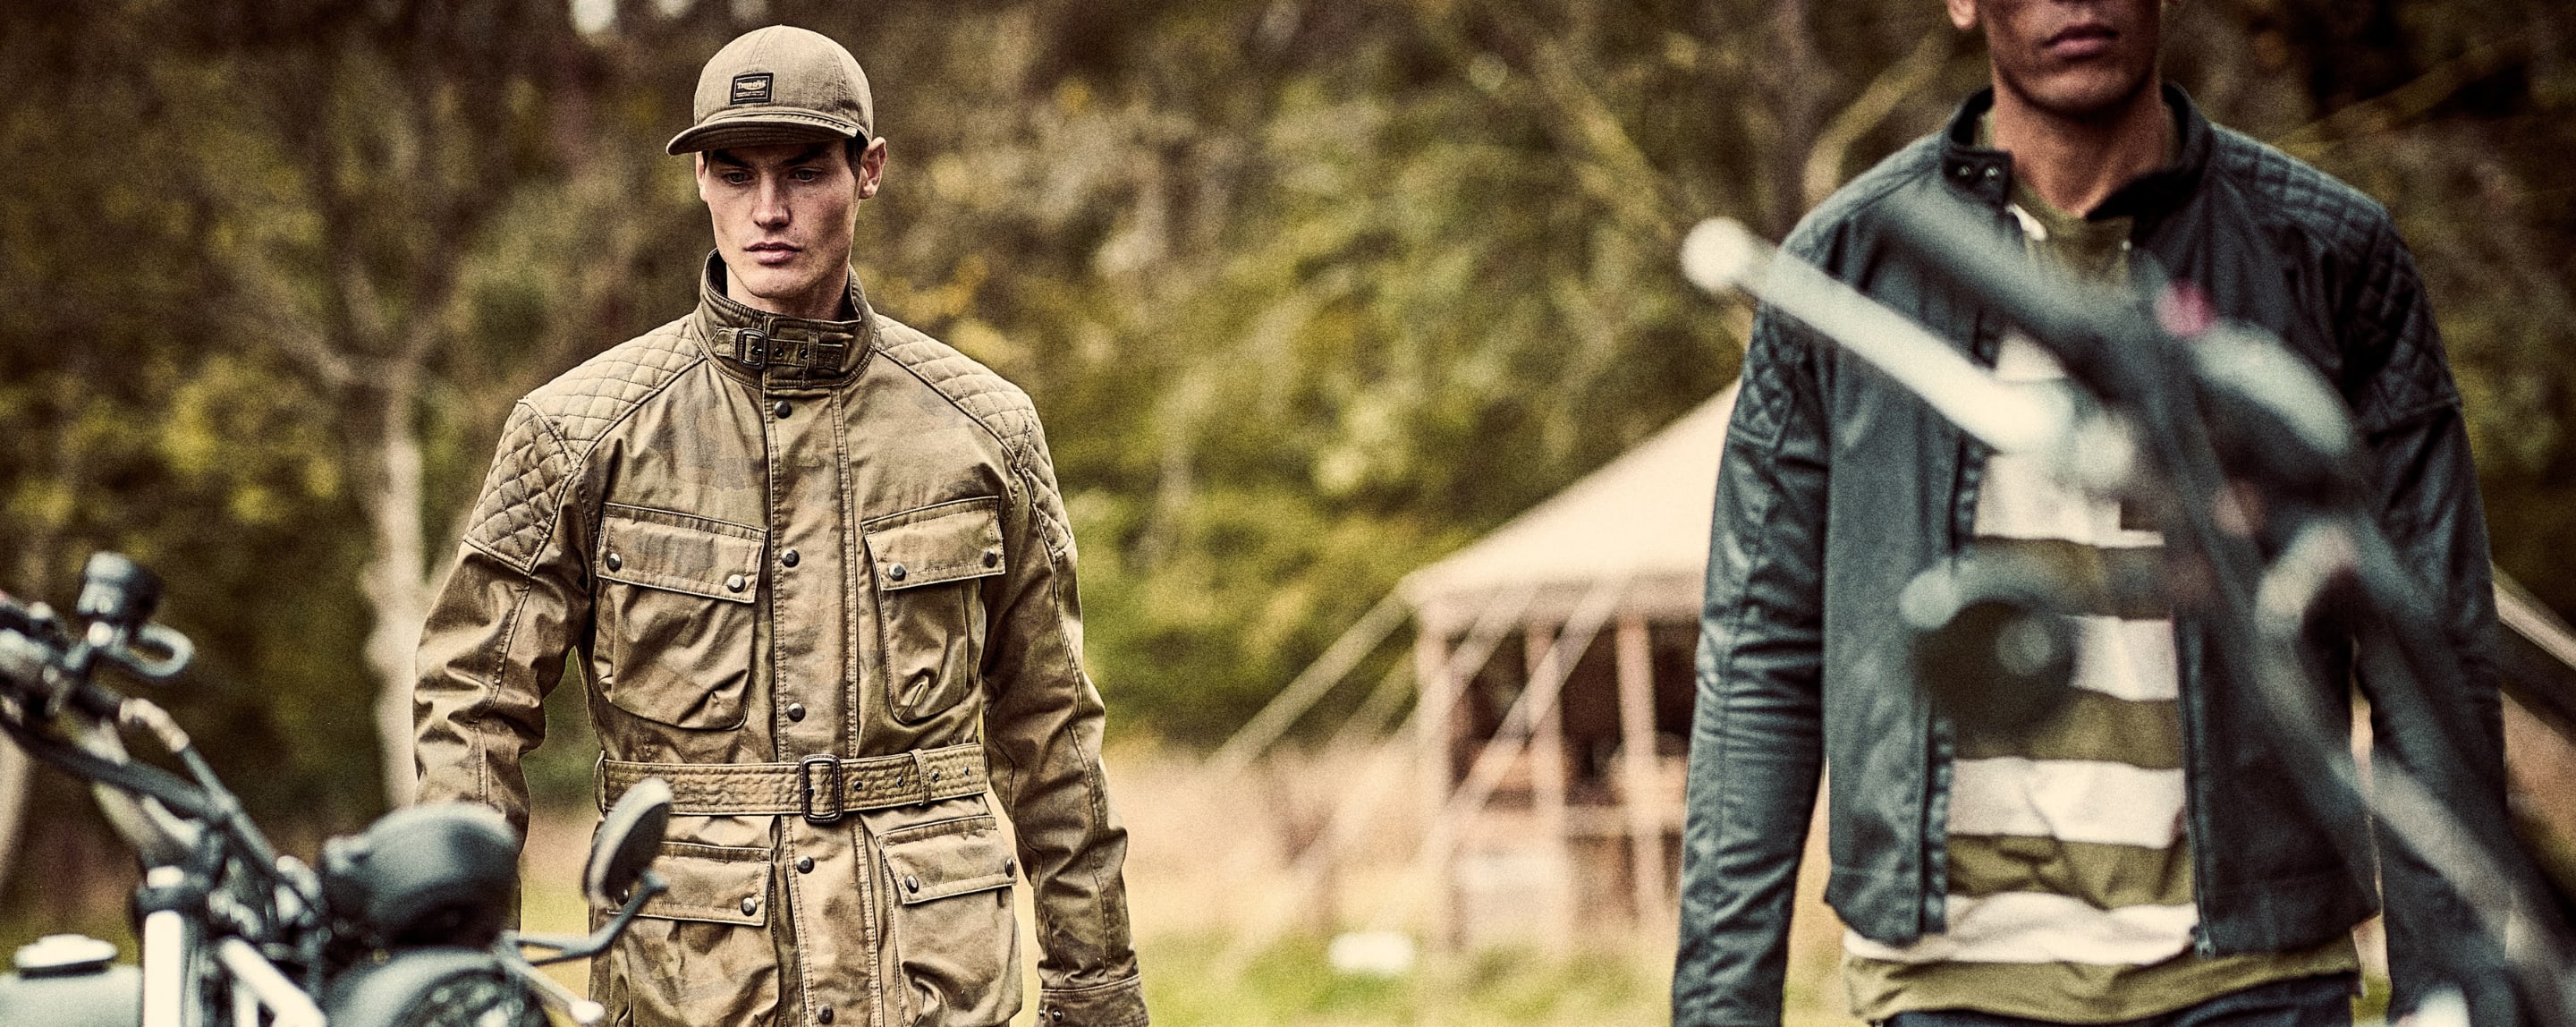 Two Triumph Motorcycle Clothing Models are walking toward motorcycles. One is wearing a Garstang Waxed Jacket in Camo, the other is wearing a Kirk Waxed Cotton Biker Jacket.)